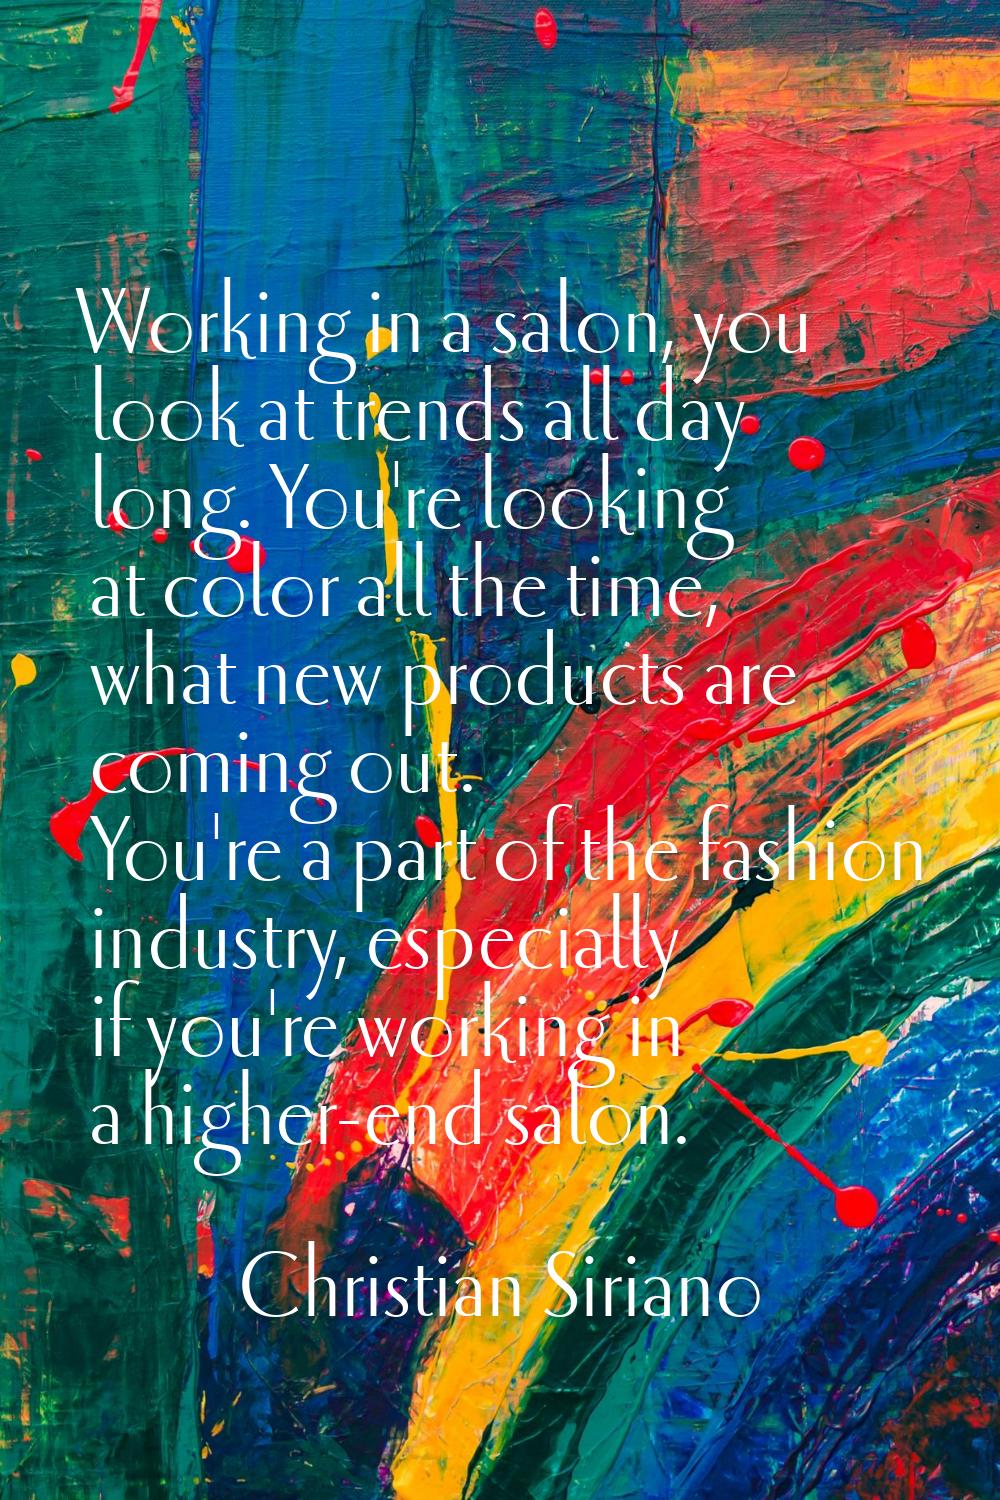 Working in a salon, you look at trends all day long. You're looking at color all the time, what new